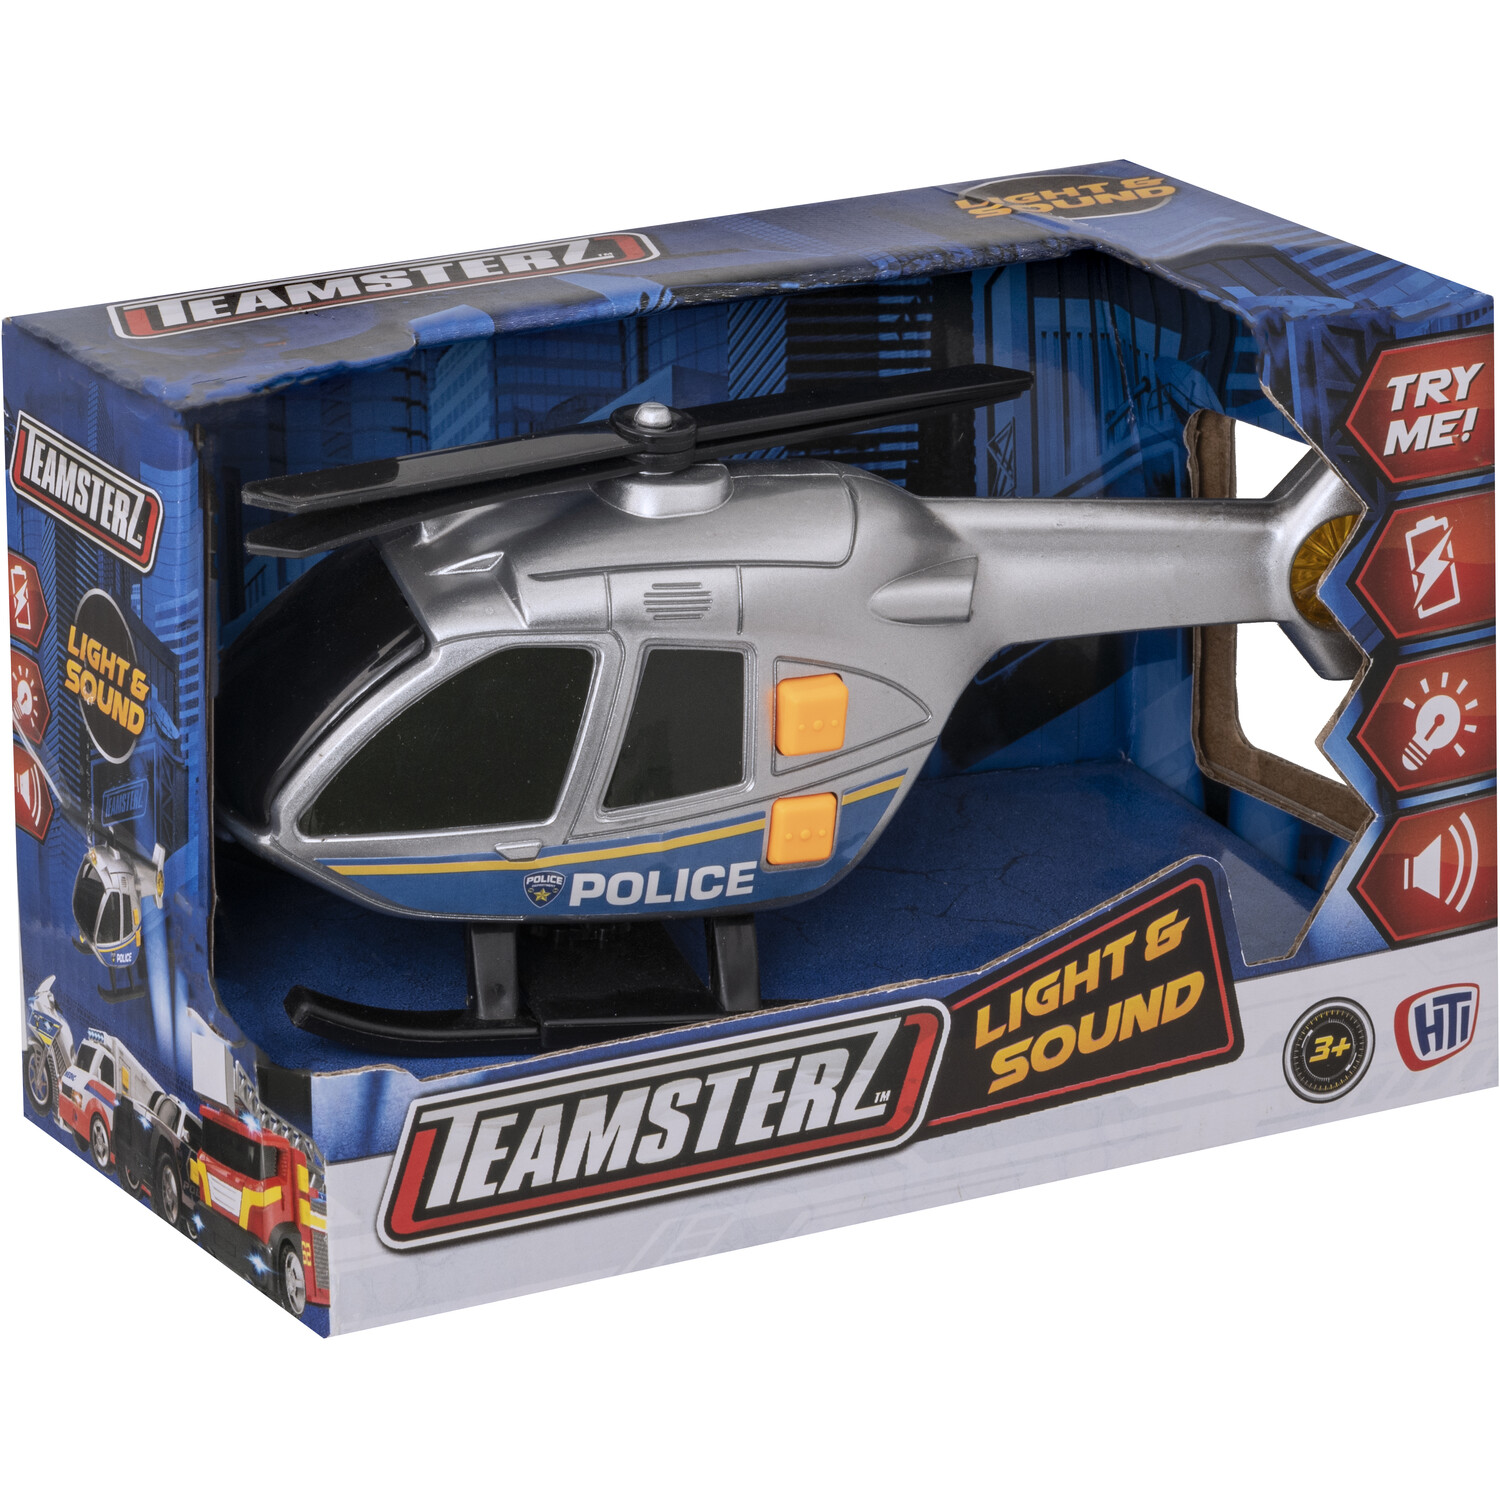 Teamsterz Small Light & Sound Rescue Helicopter Image